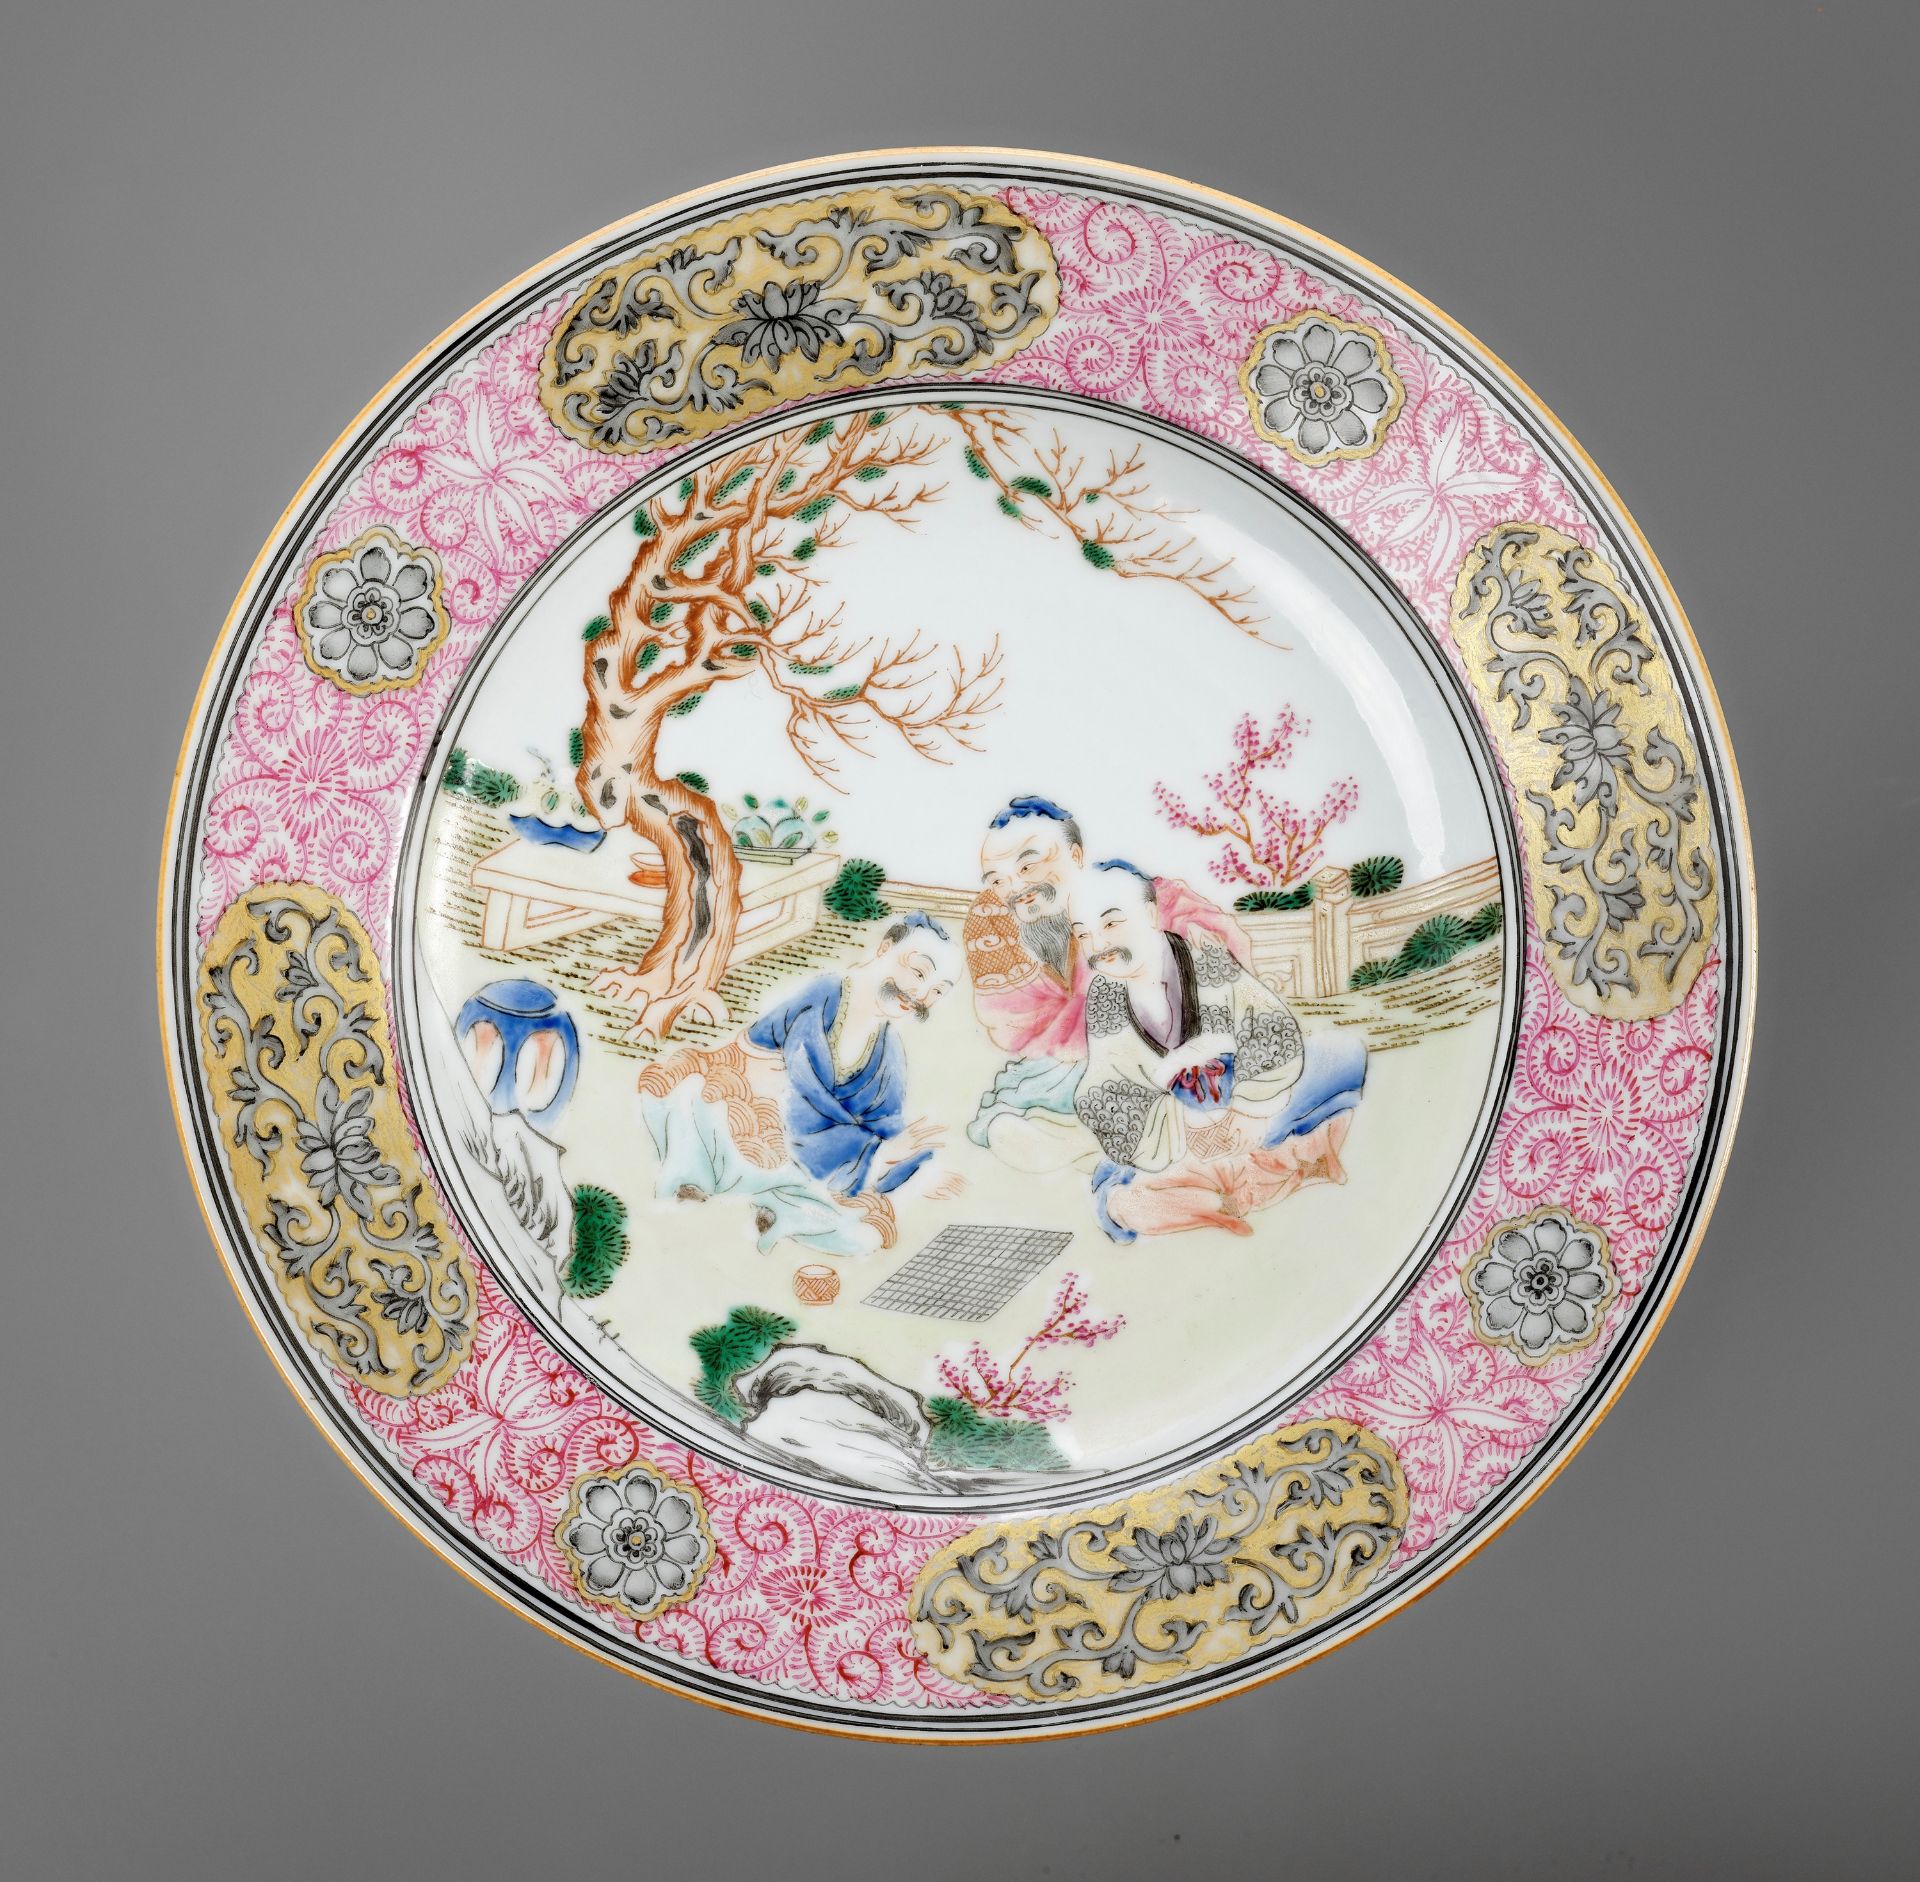 A GILT, ENAMELED AND GRISAILLE-DECORATED FAMILLE ROSE 'WEIQI PLAYERS' DISH, 18TH CENTURY